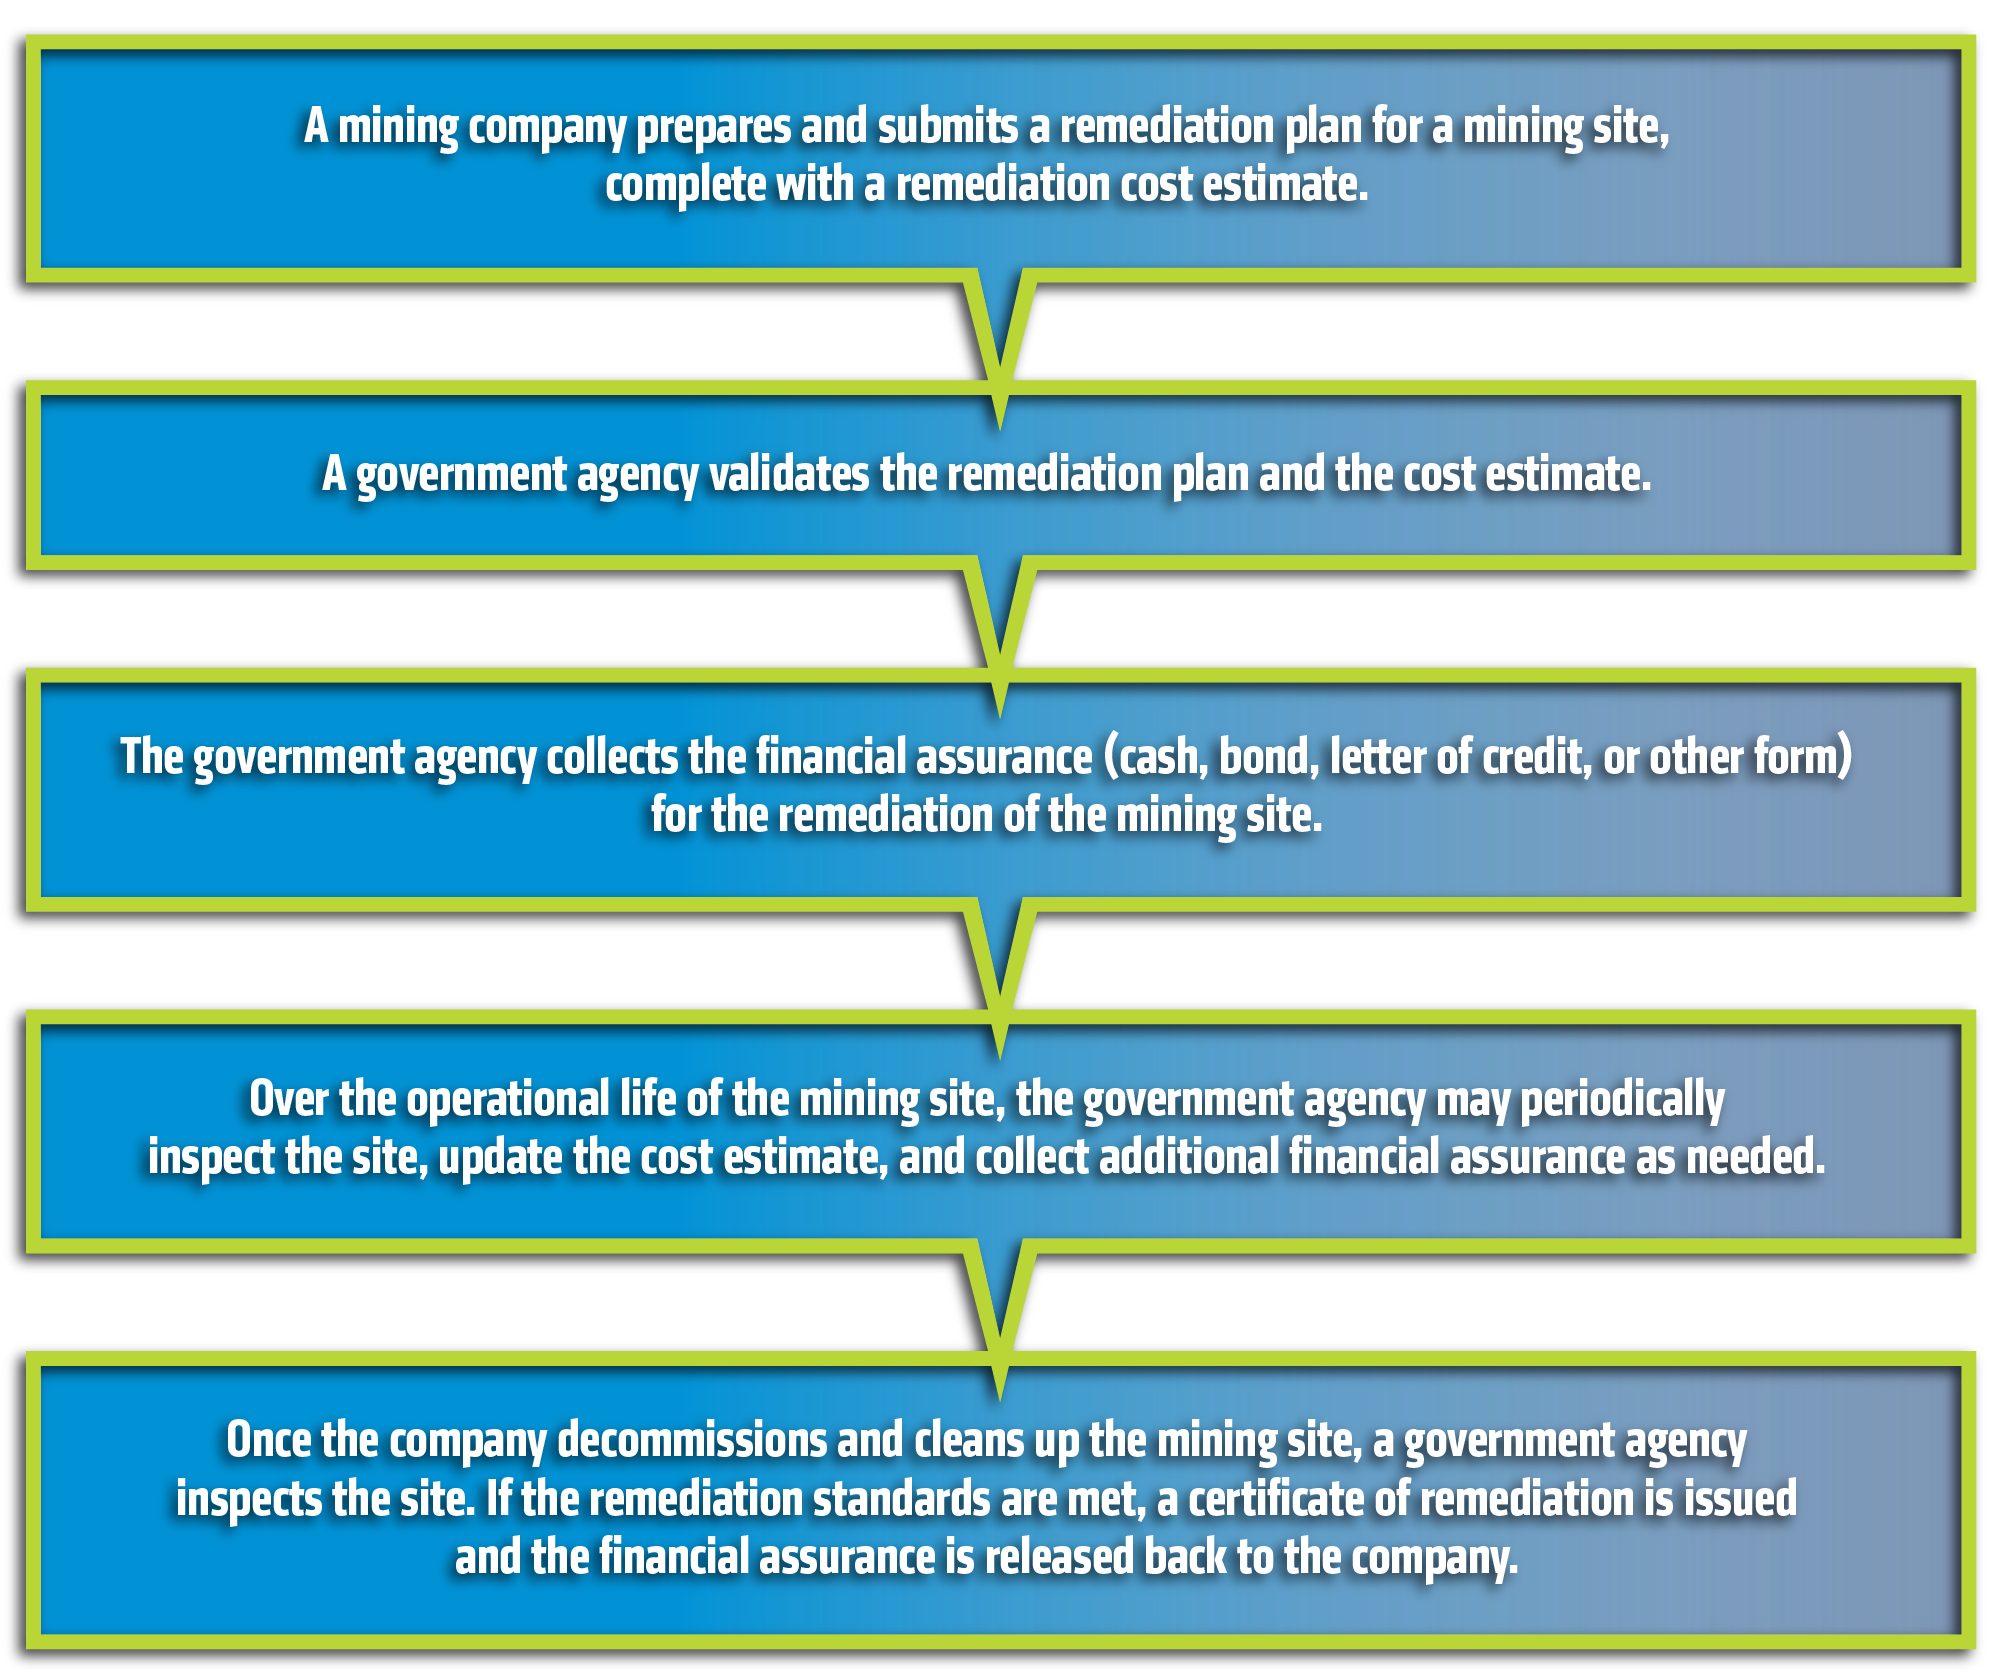 The Main Steps of the Financial Assurance Process Over the Life of a Mining Operation